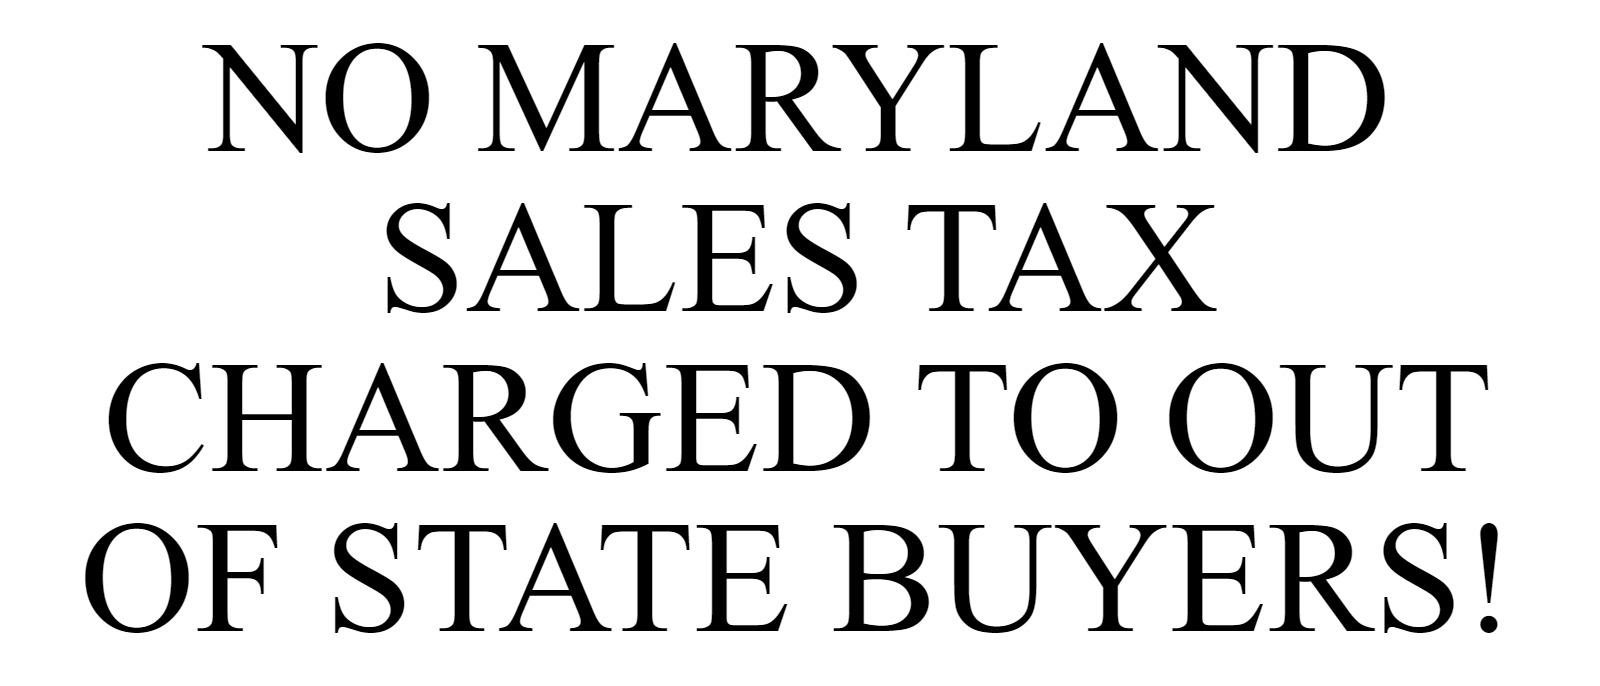 No Maryland sales tax charged to out of stat buyers!